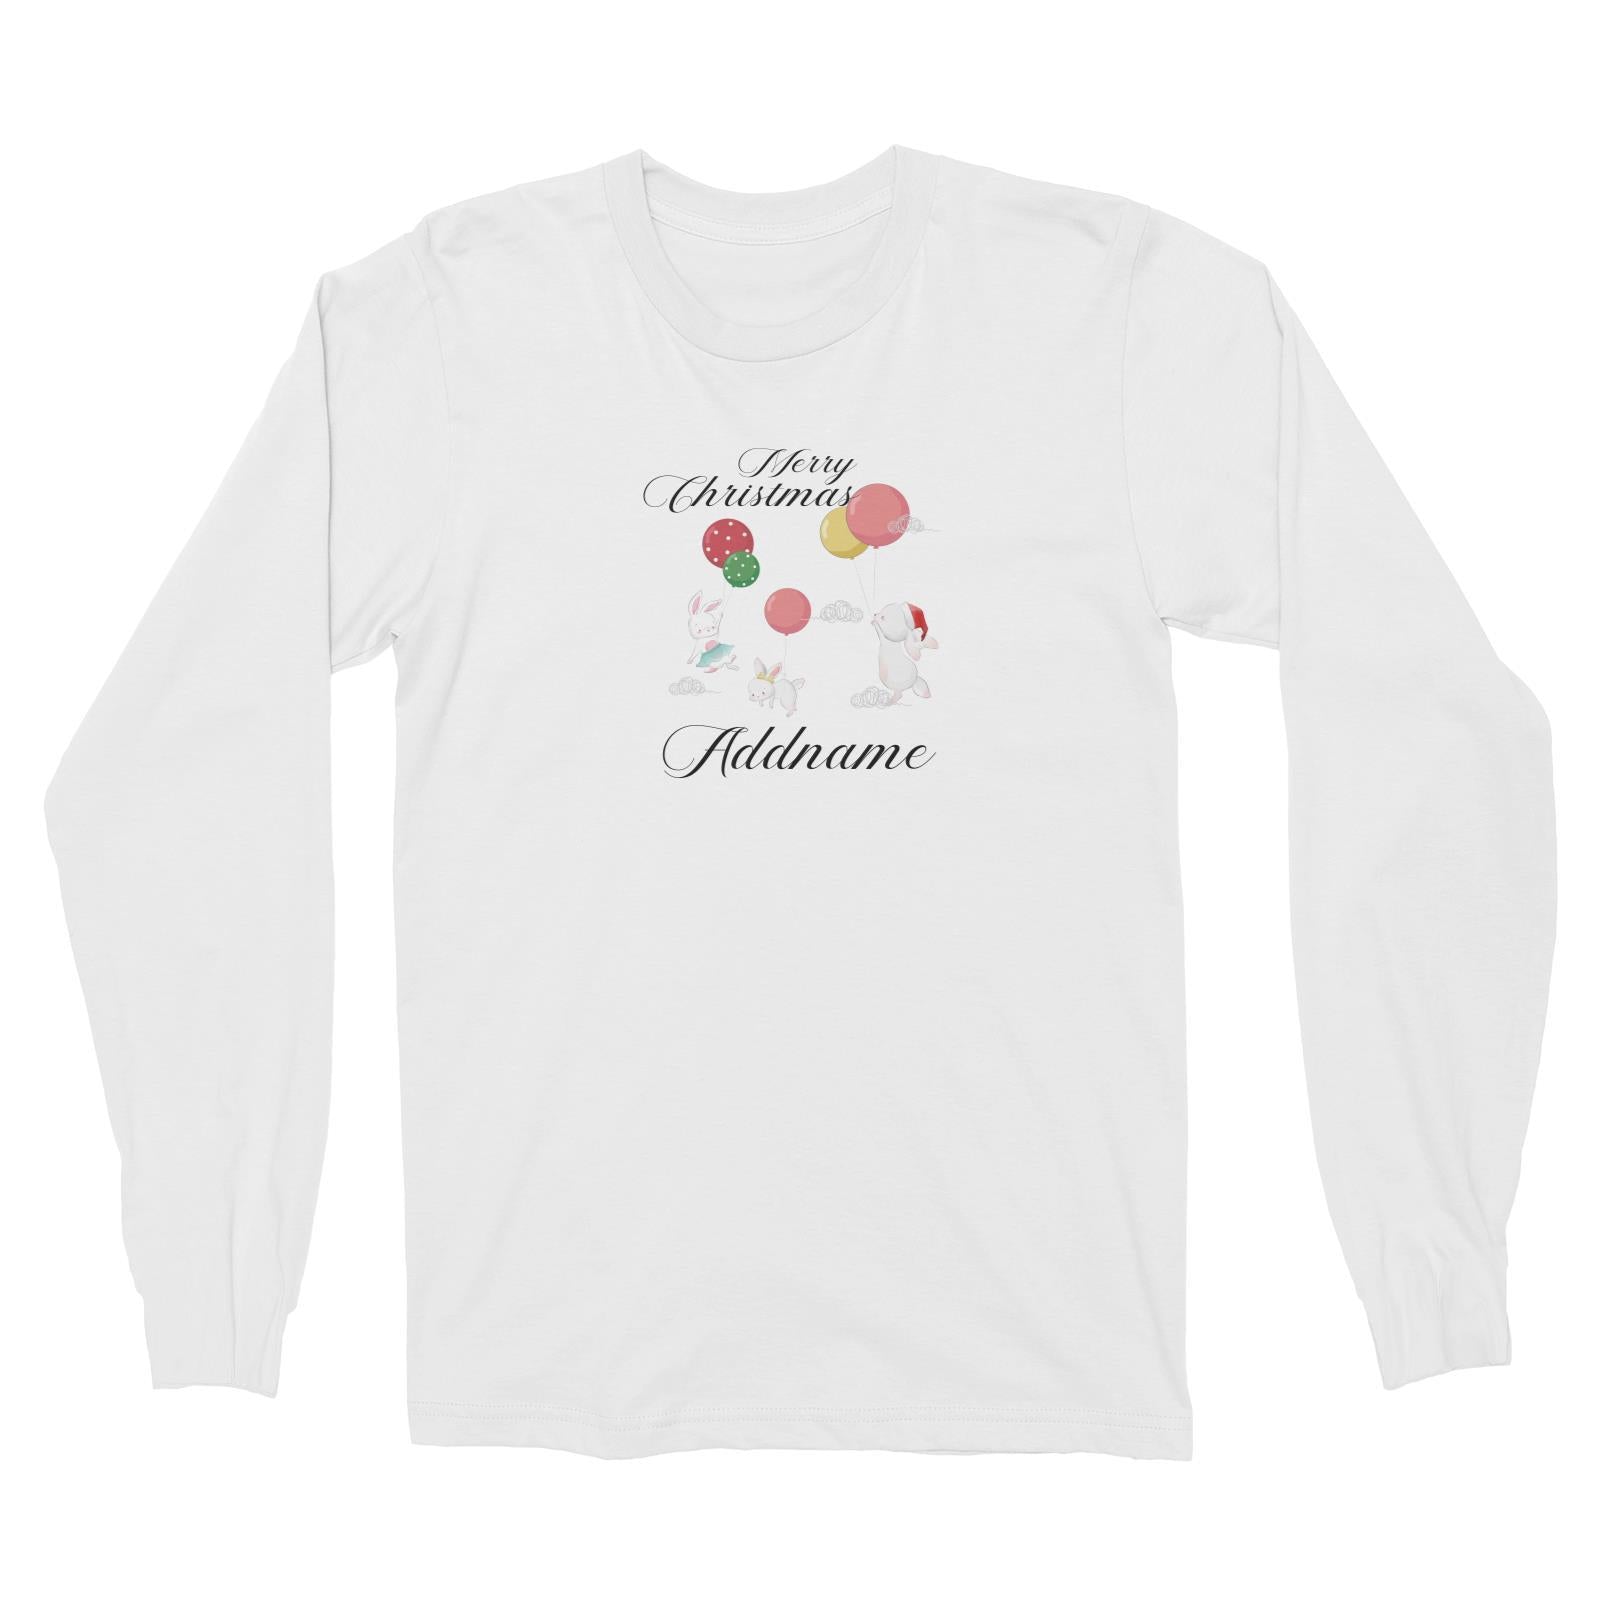 Christmas Cute Rabbits With Balloons Merry Christmas Addname Long Sleeve Unisex T-Shirt